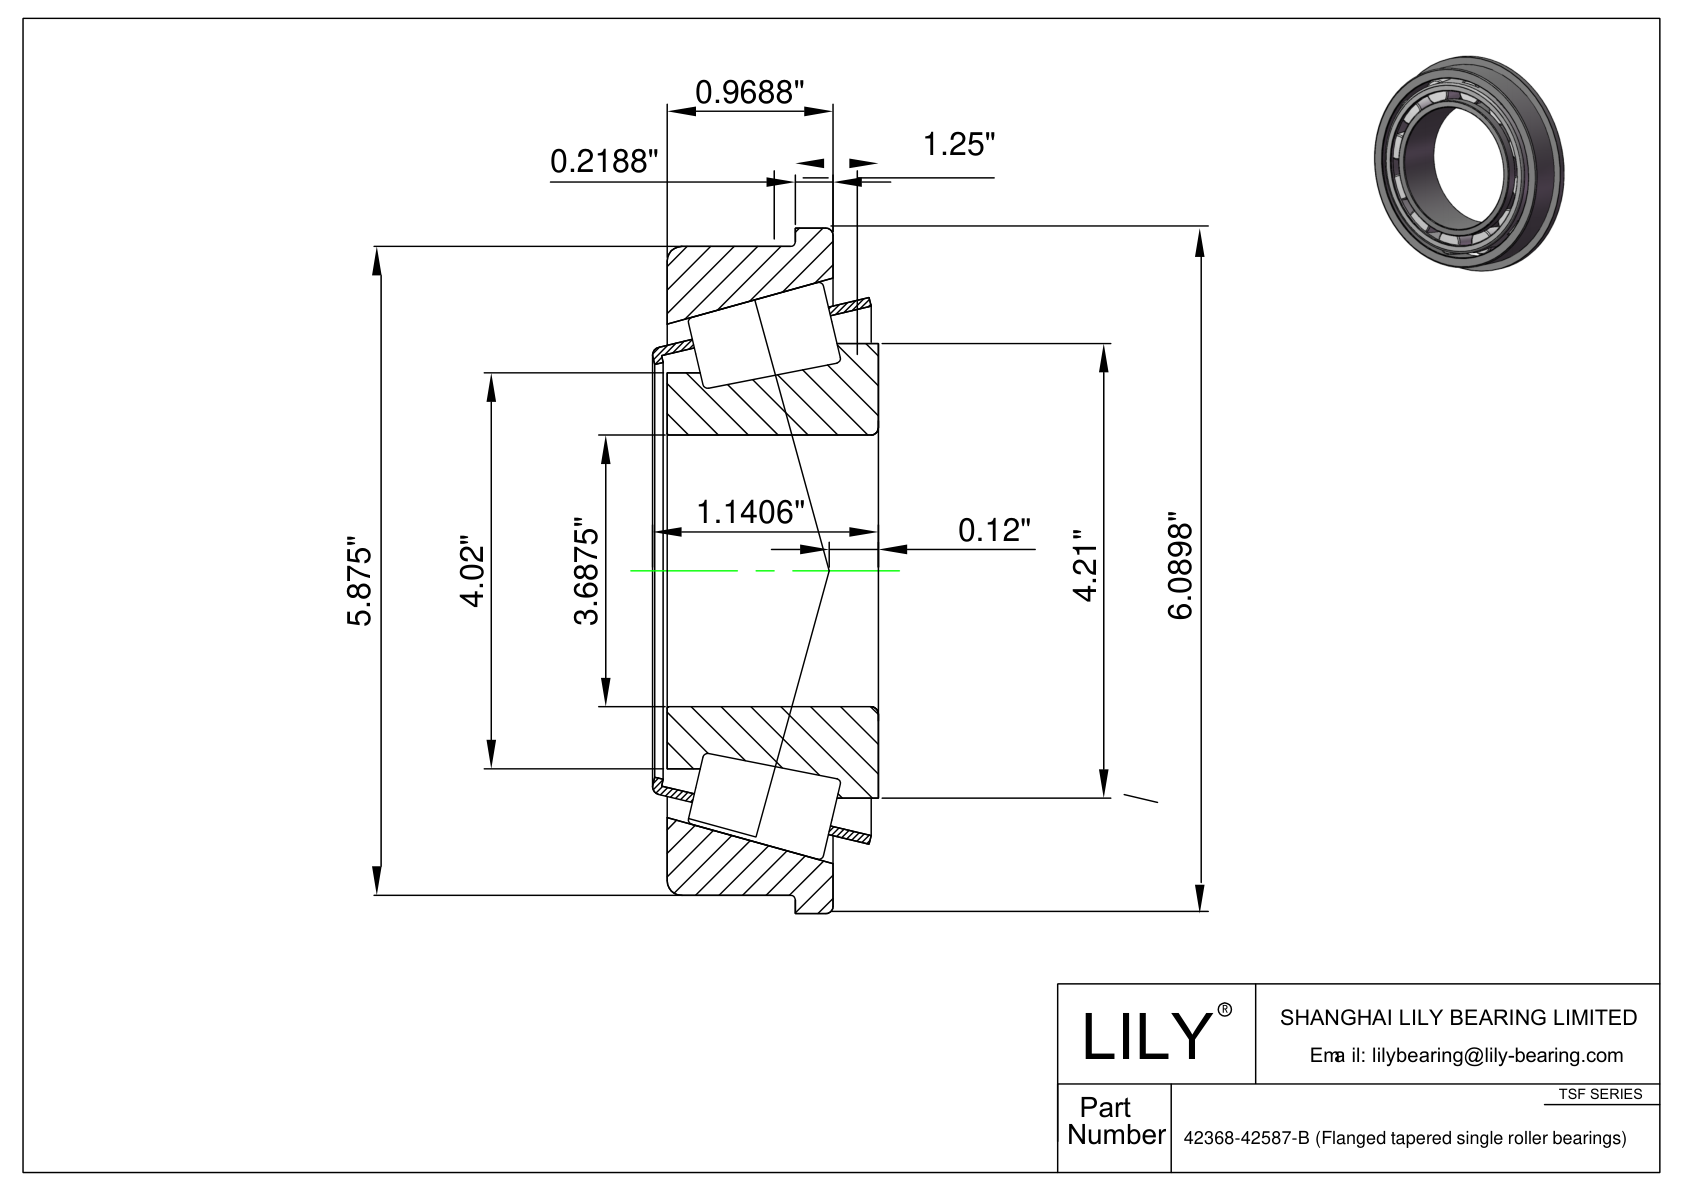 42368-42587-B TSF (Tapered Single Roller Bearings with Flange) (Imperial) cad drawing